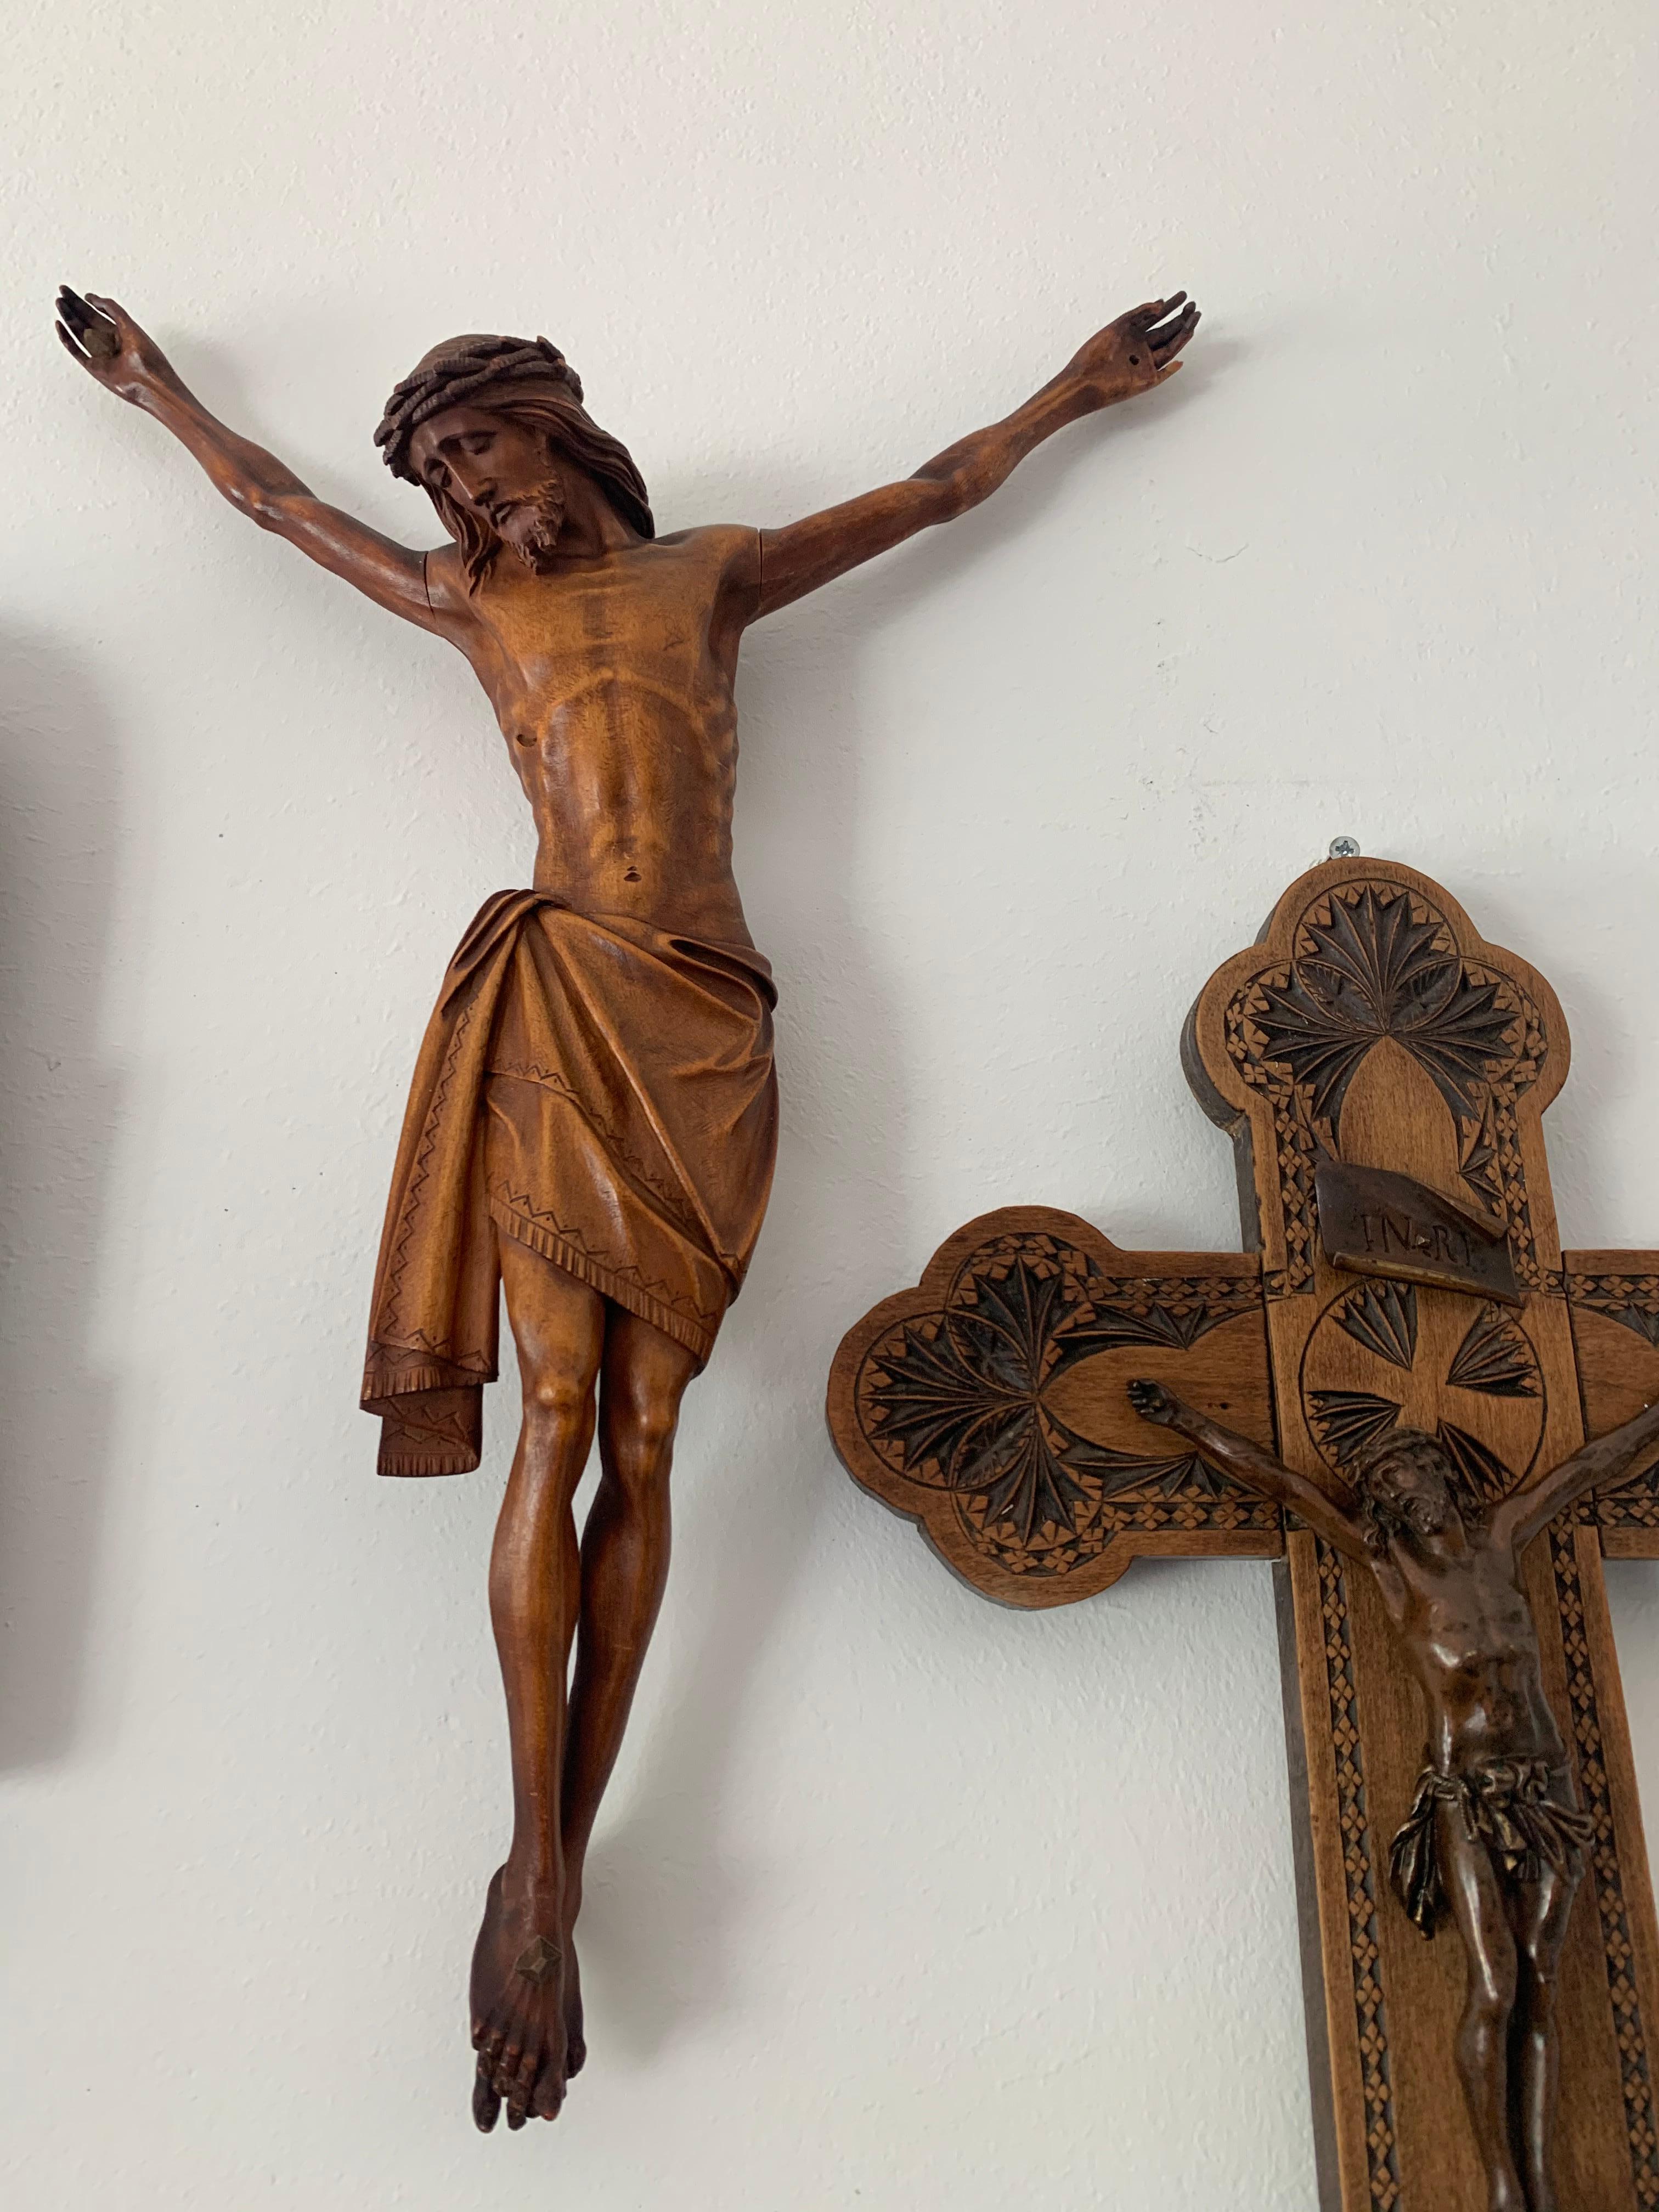 Arts and Crafts Early 1900s Finest Handcarved Wood Corpus of Christ Sculpture for Wall Mounting